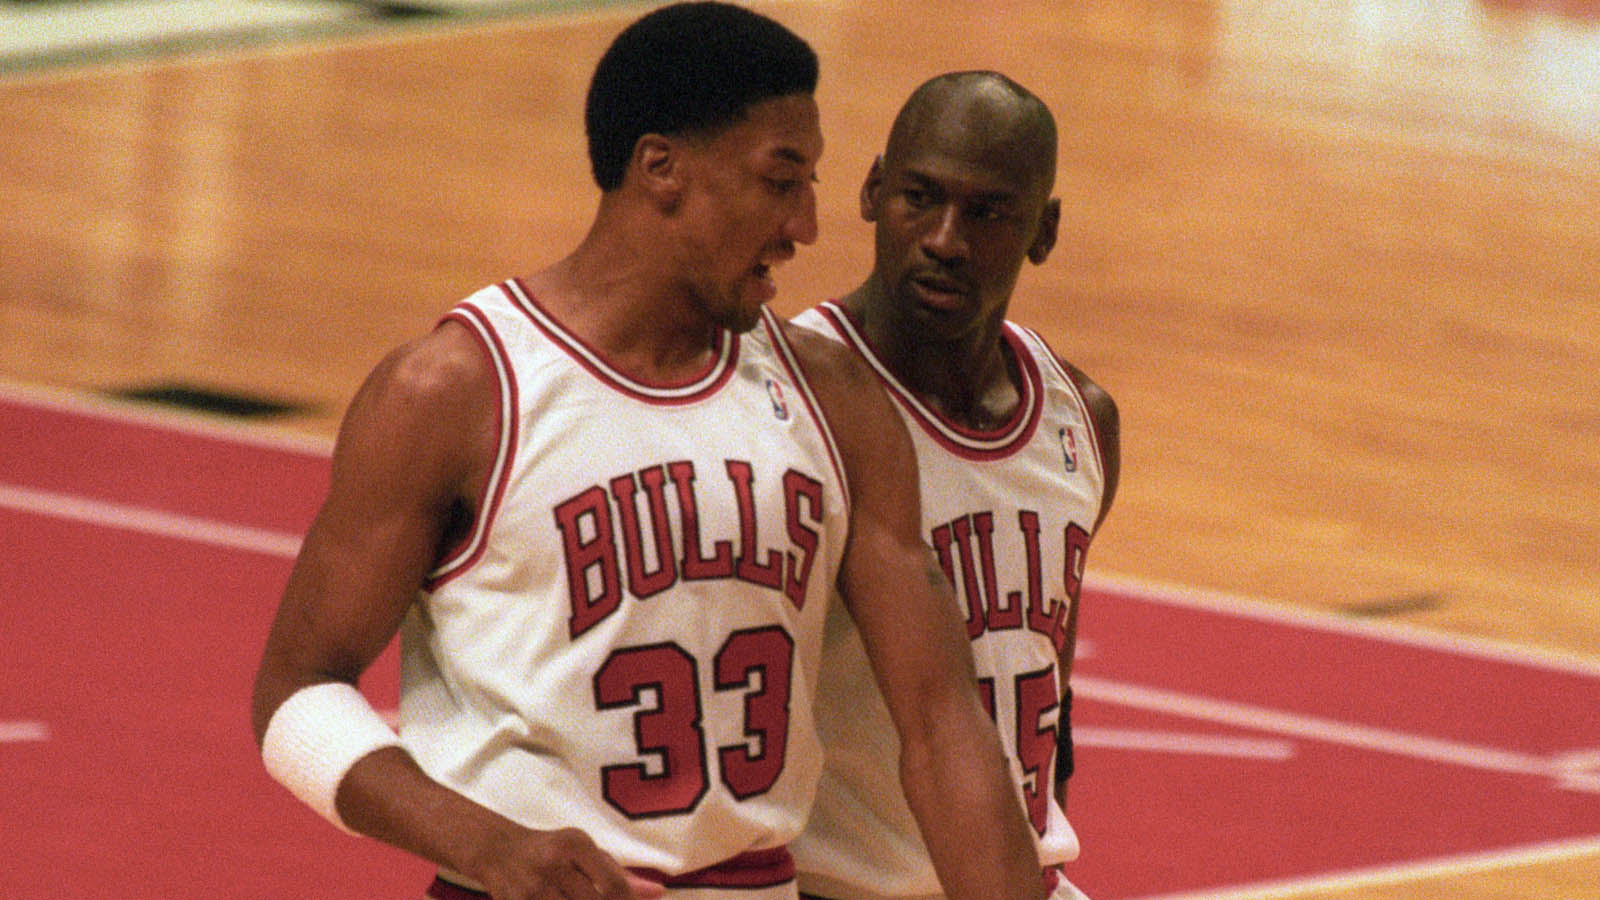 Even if Michael Jordan's Bulls stayed together, a fourth straight